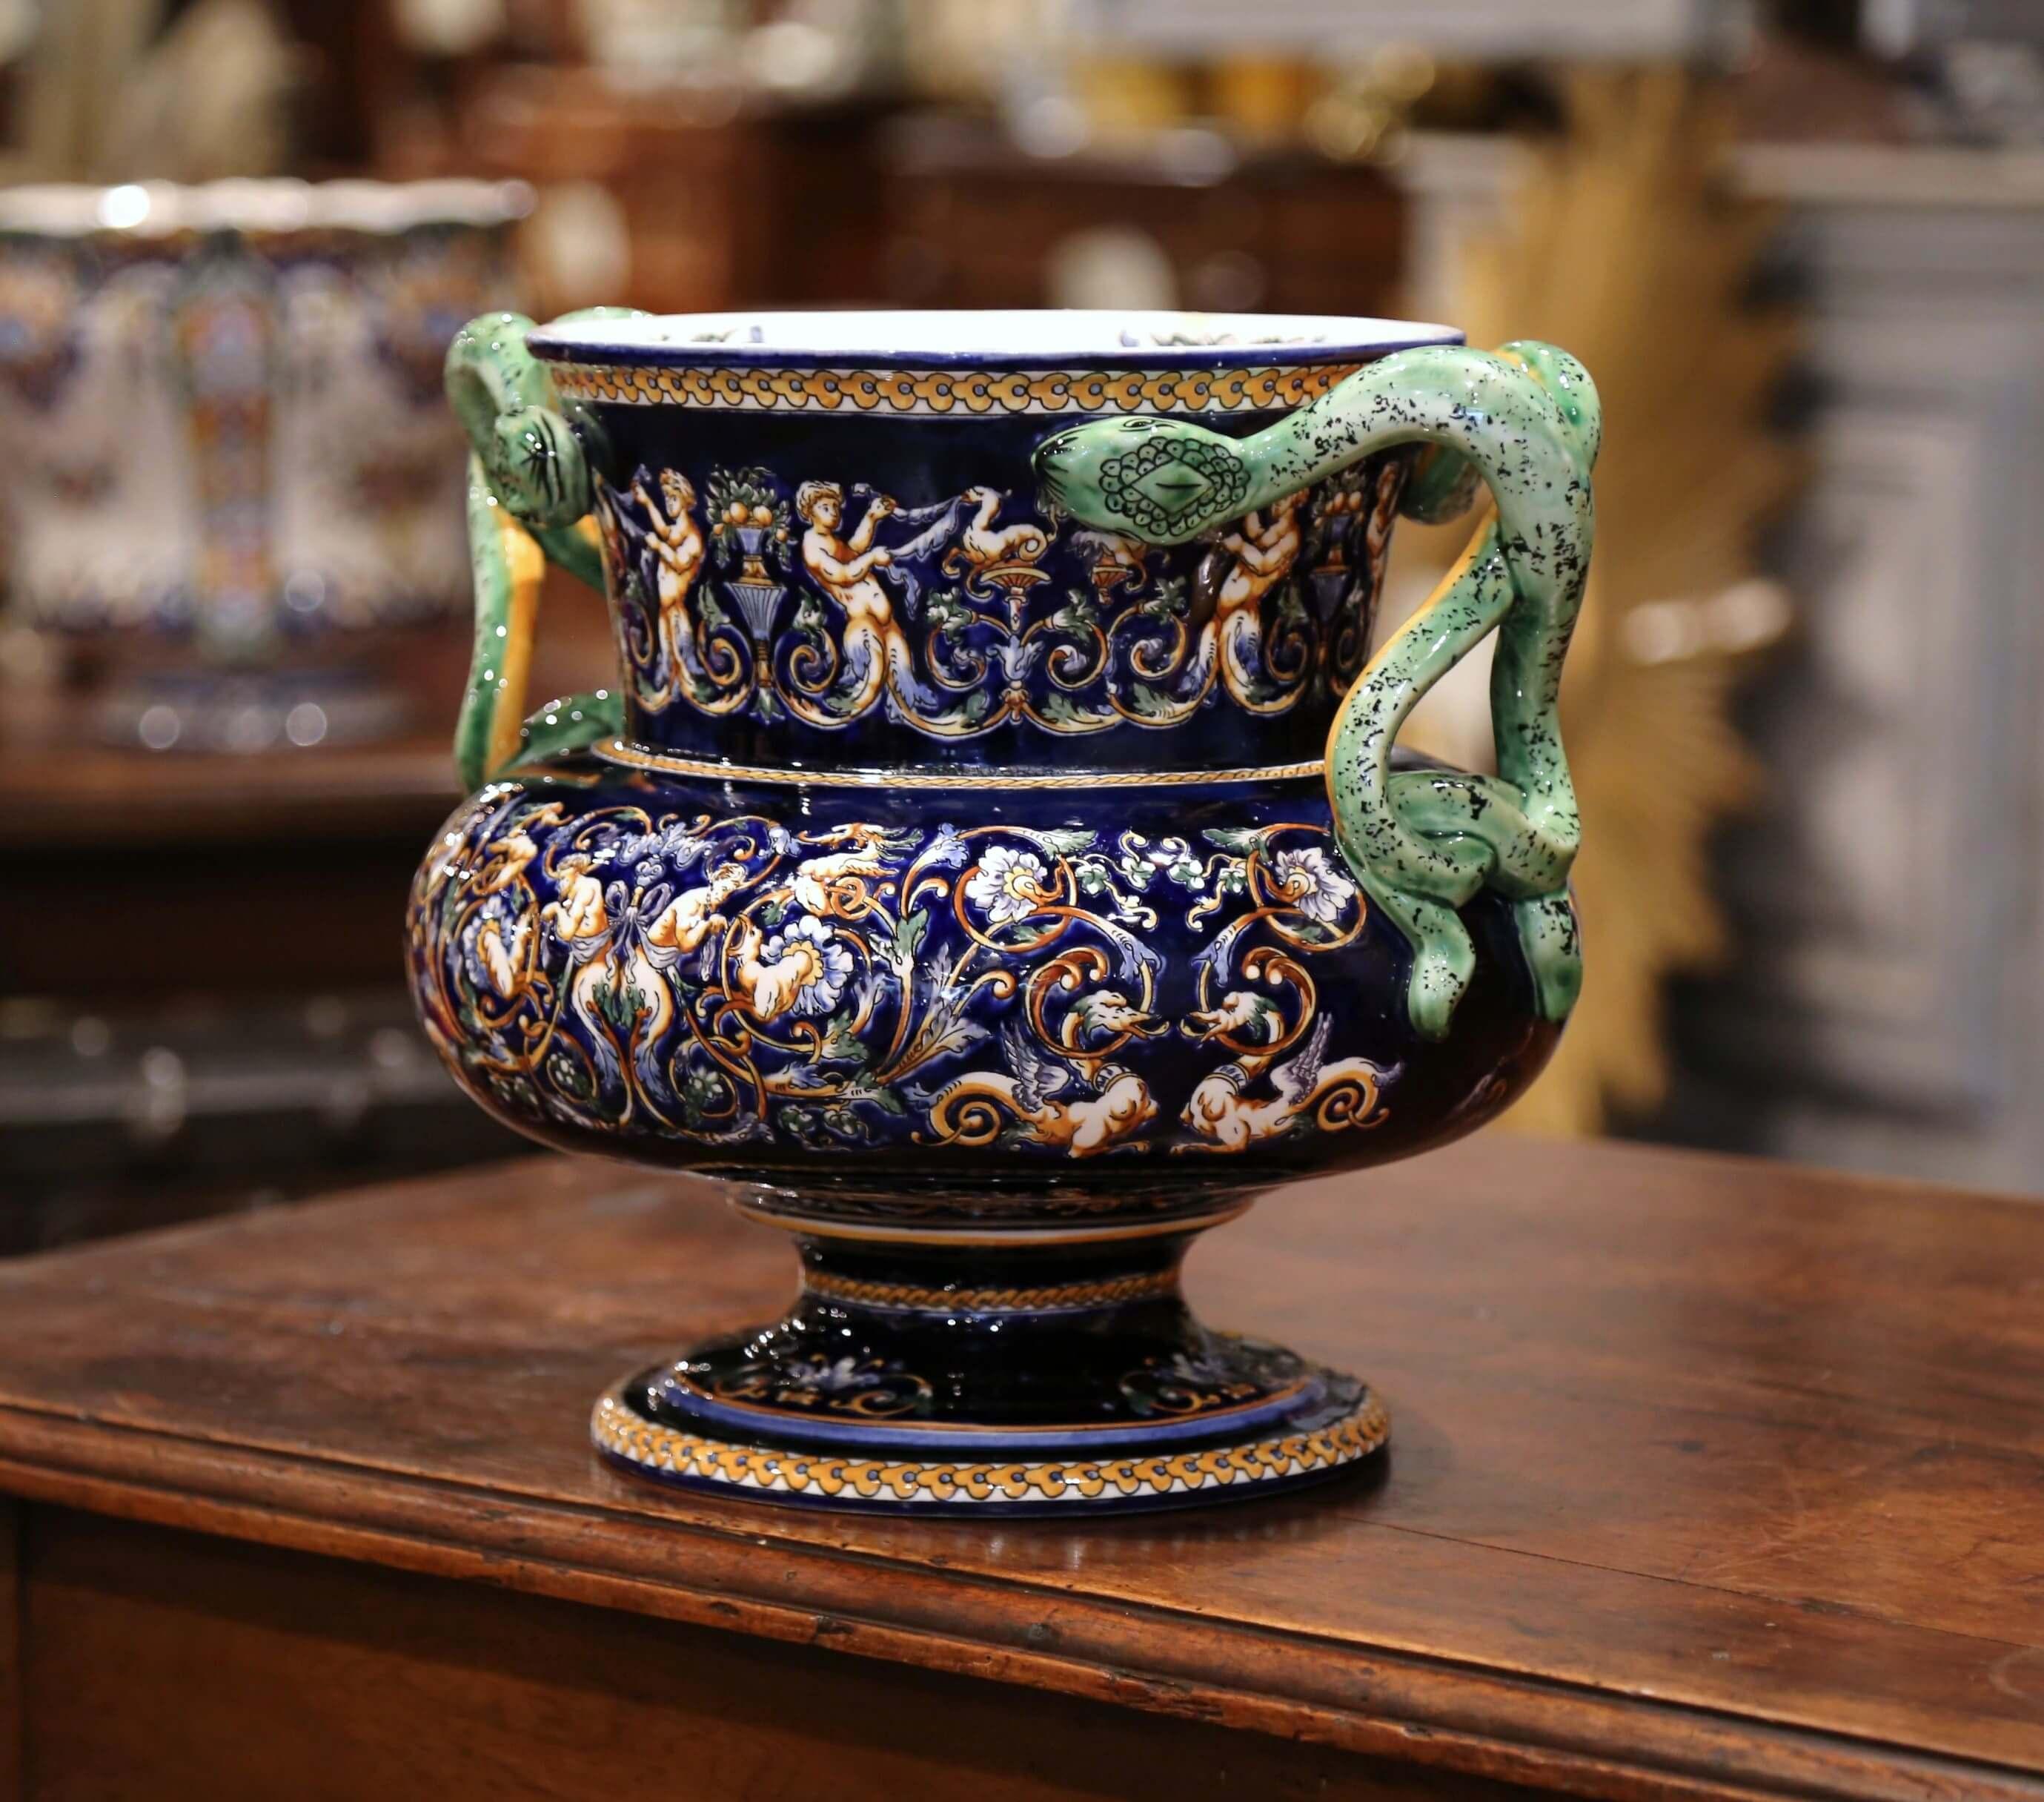 This round and colorful antique planter was created in “Faïencerie de Gien,